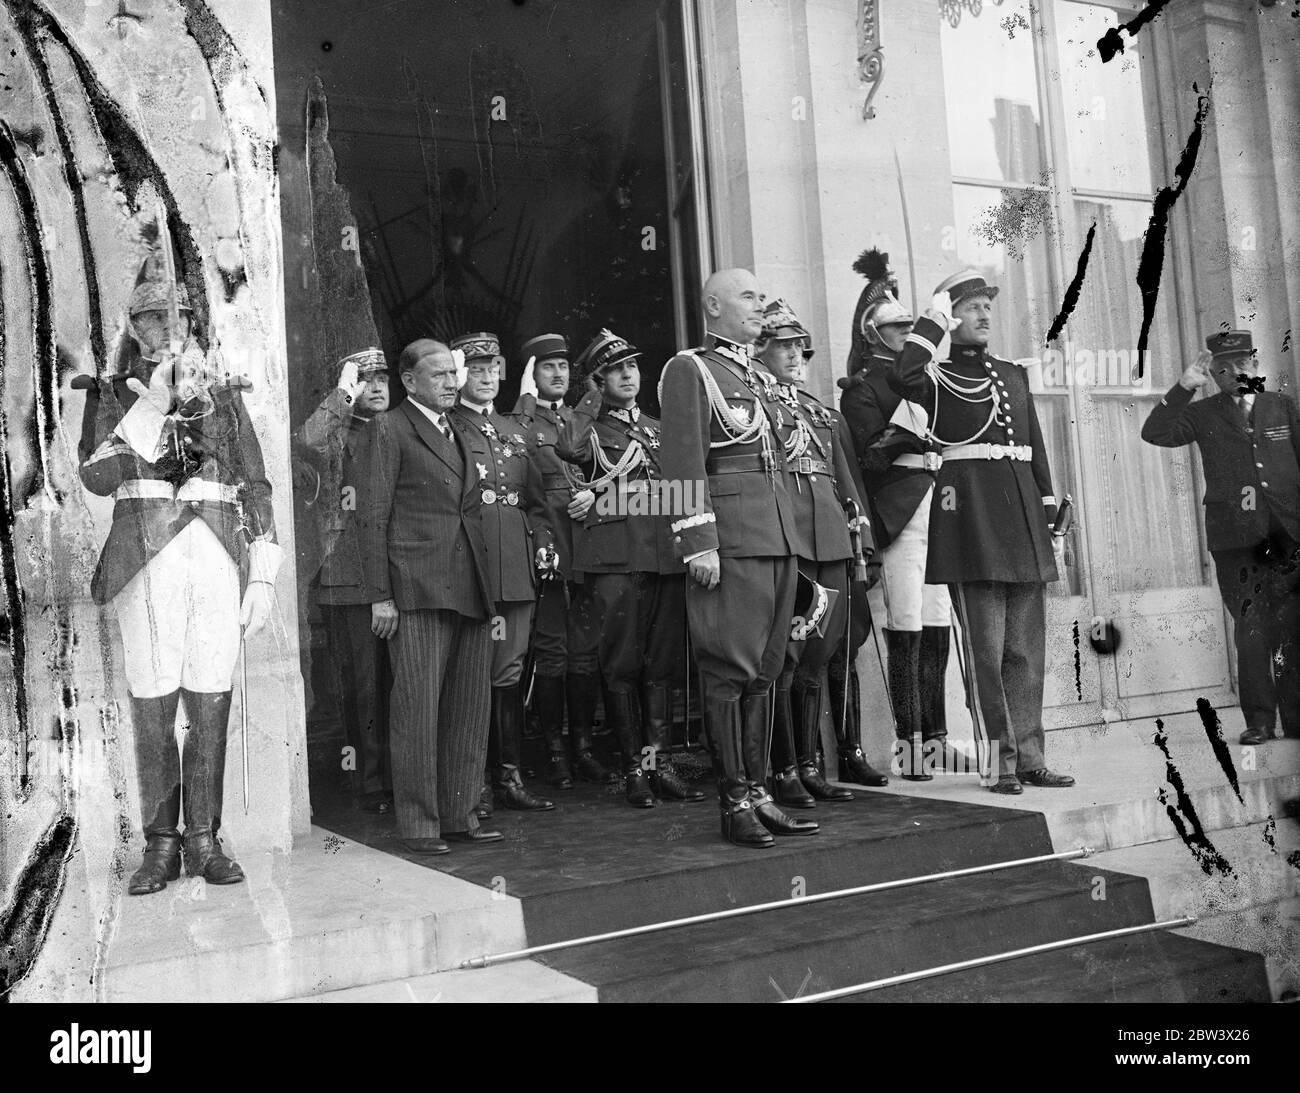 Polish Generalissimo visits Paris to strengthen Franco , Polish ties . General Edward Rydz Smigly successor of Marshal Pilsudski as Poland ' s first citizen after the president of the republic , with Edouard Daladier , French minister of National Defense , after a visit to the war ministry . 31 August 1936 . Original caption from negative Stock Photo